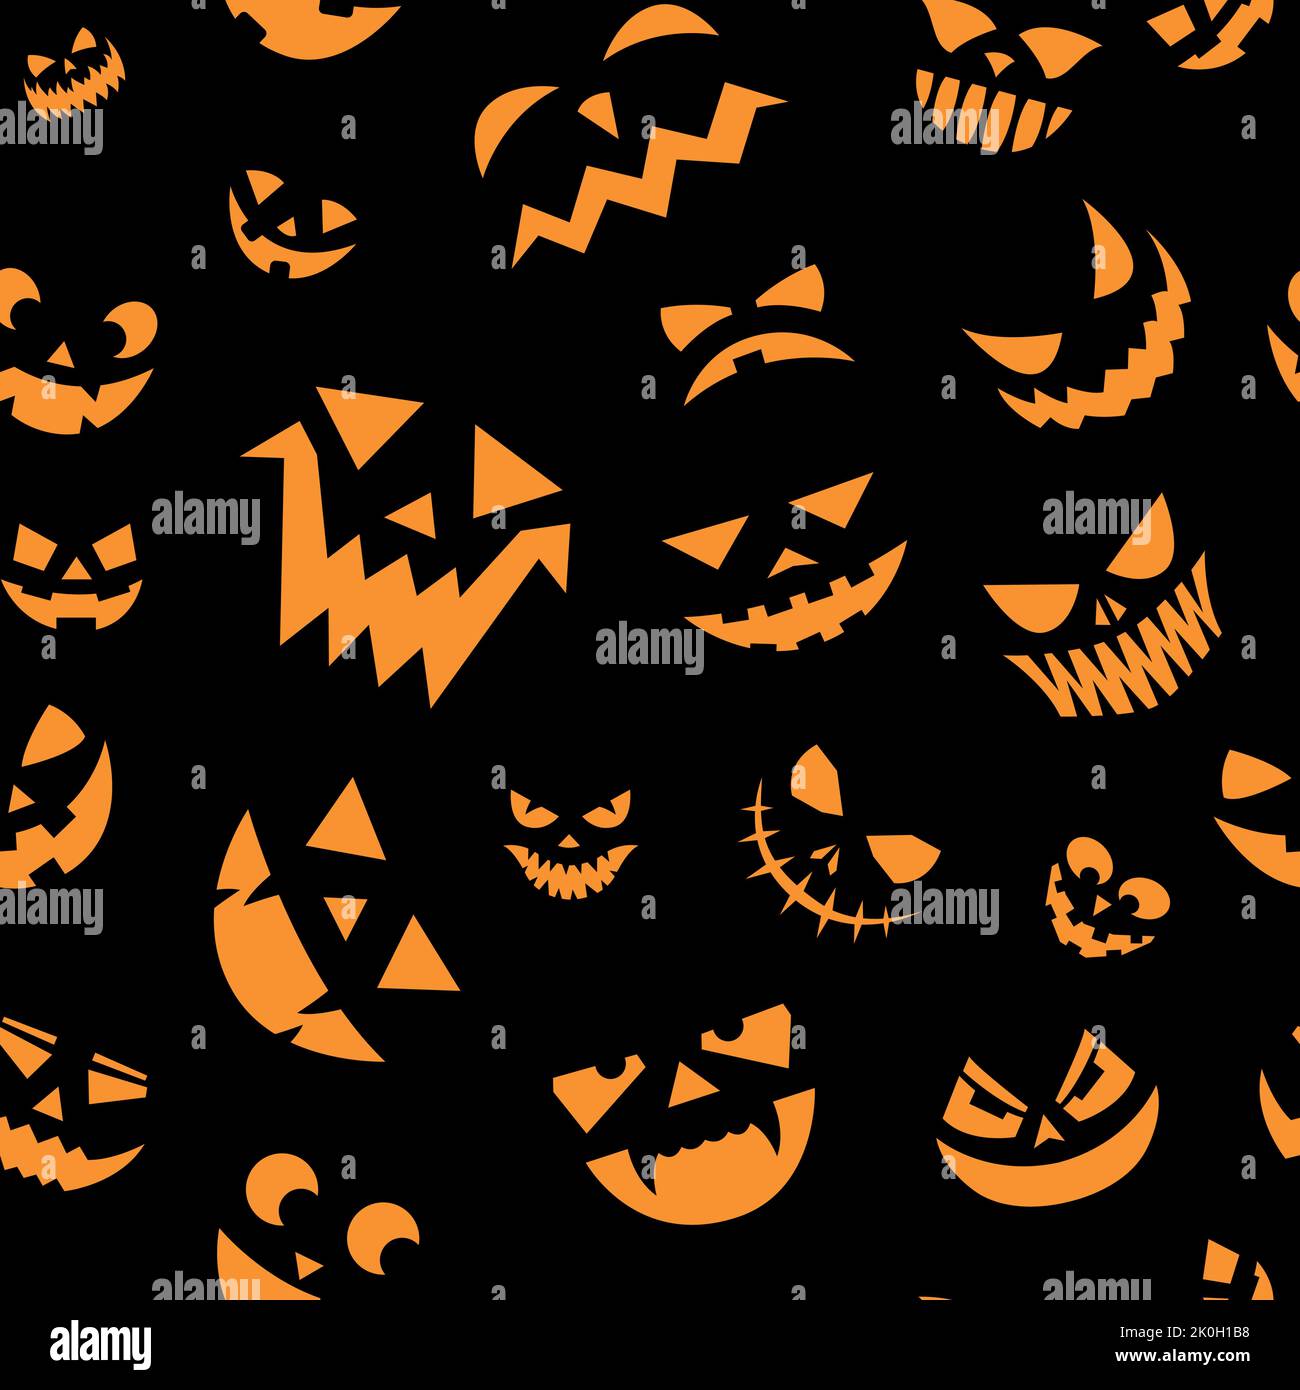 Scary faces pattern. Seamless print of Halloween pumpkin carving face with scary angry eyes and smiling mouth with teeth. Vector texture Stock Vector